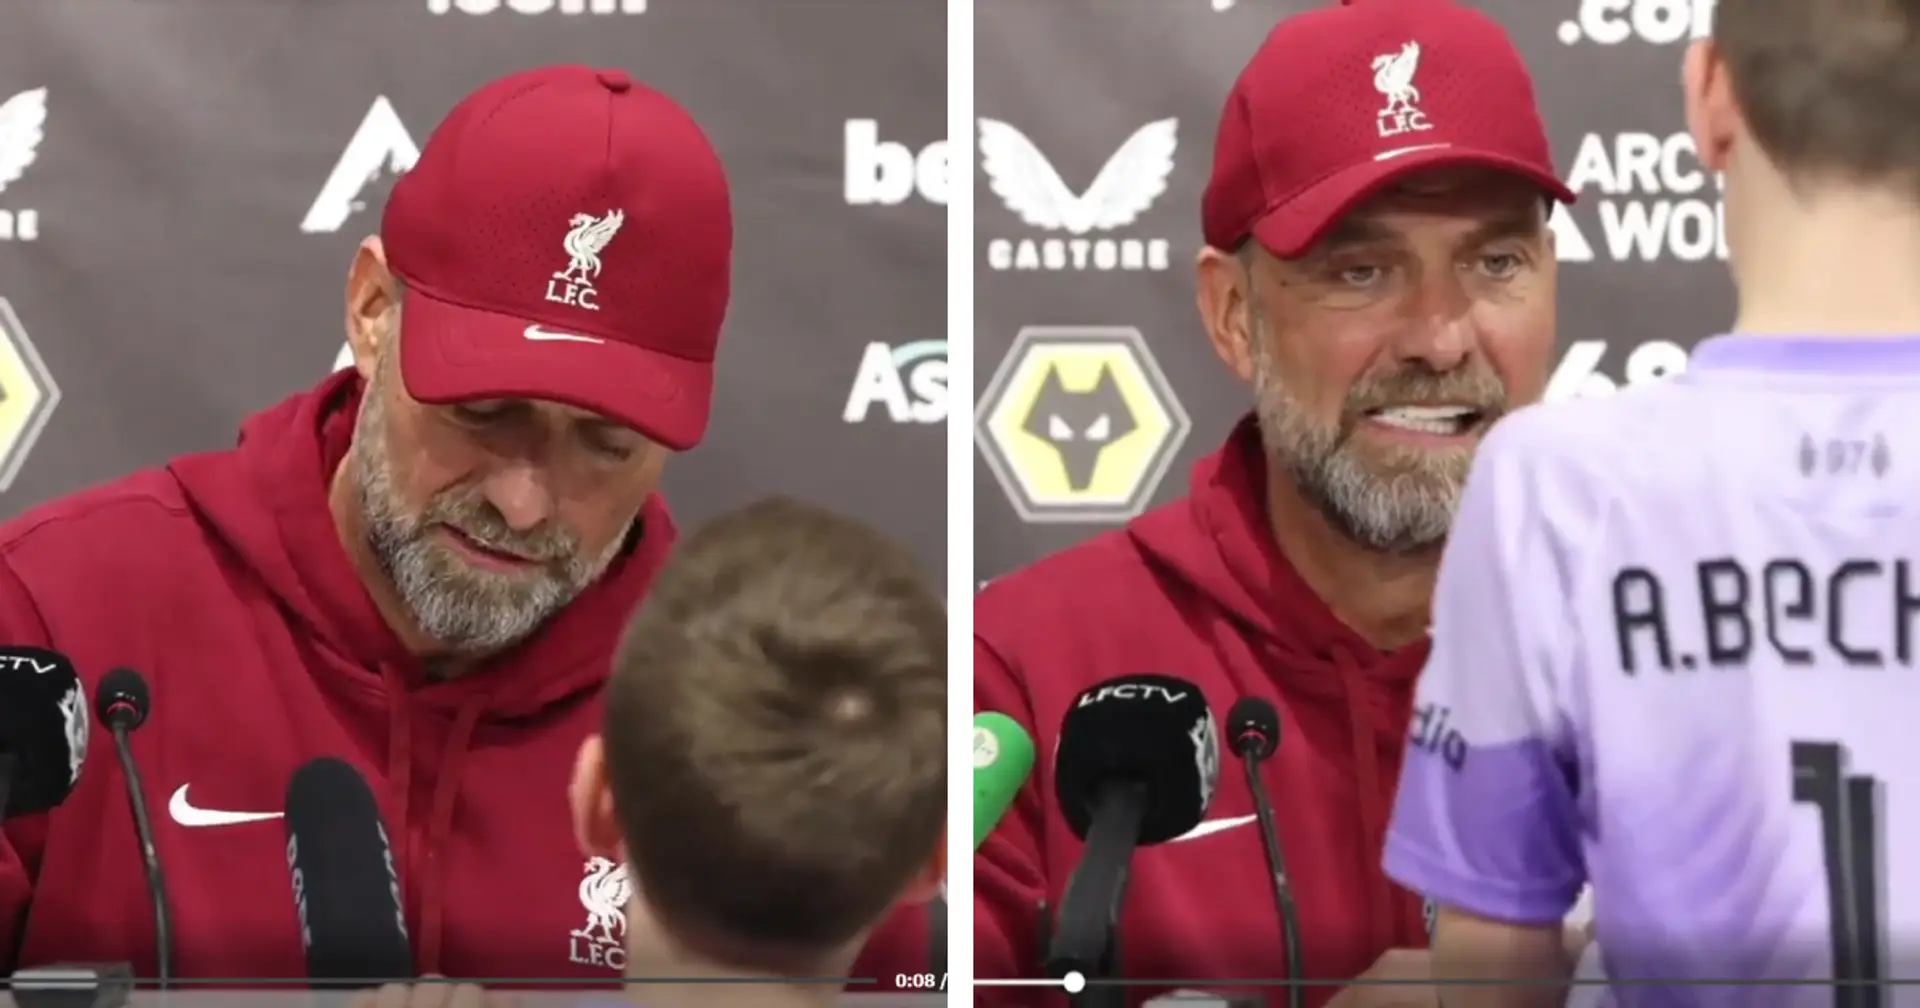 'Best question in the whole press conference': Klopp shares wholesome moment with young Liverpool fan